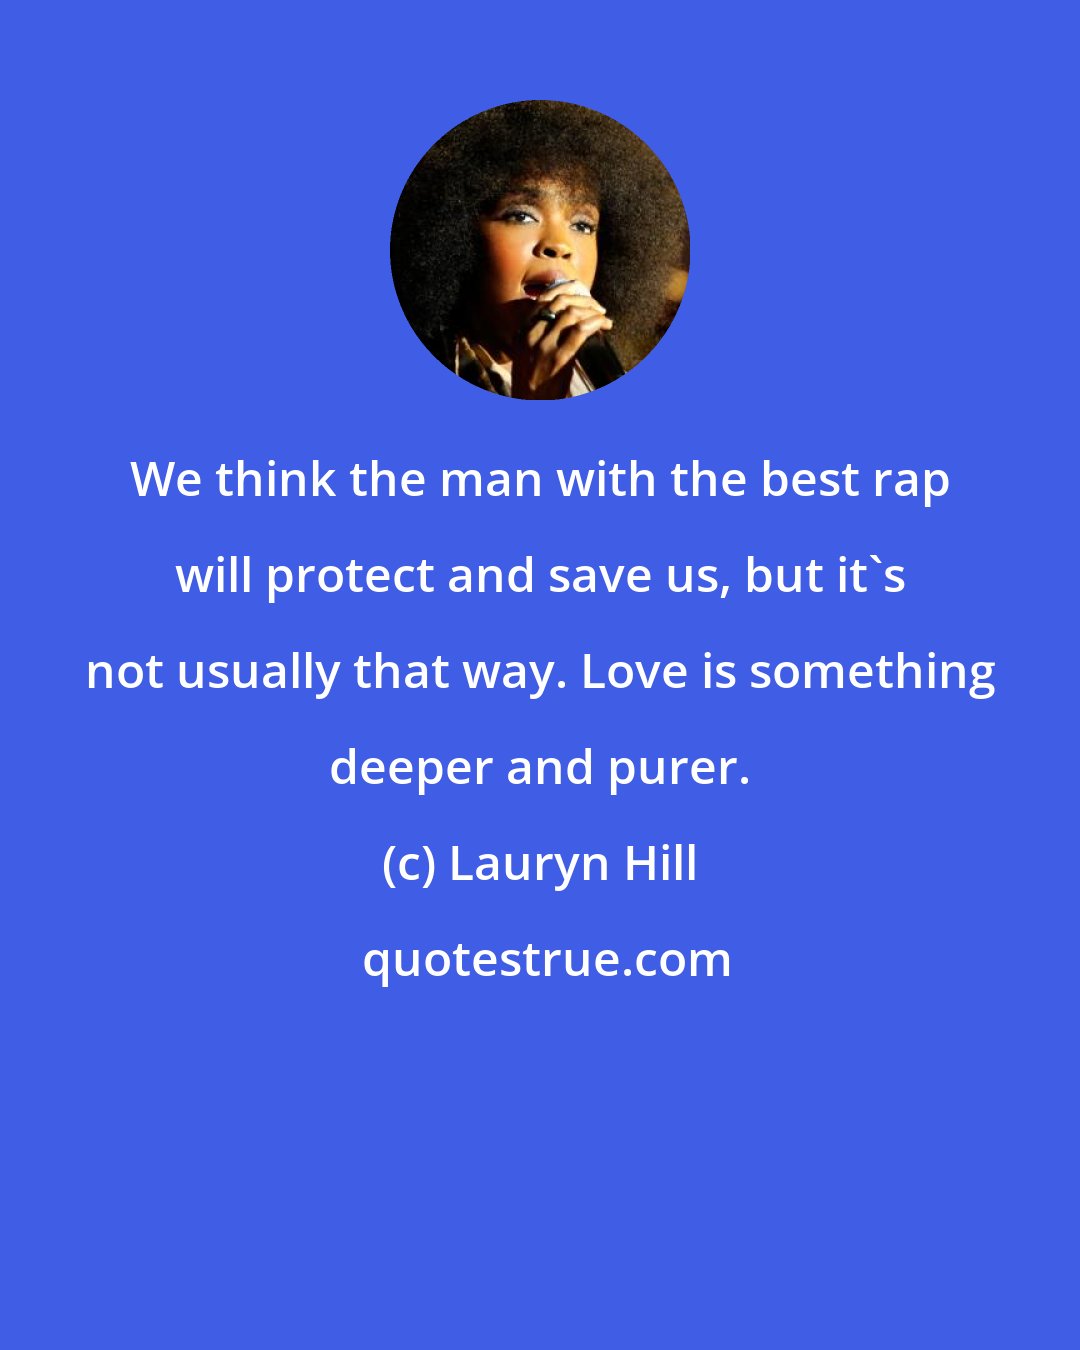 Lauryn Hill: We think the man with the best rap will protect and save us, but it's not usually that way. Love is something deeper and purer.